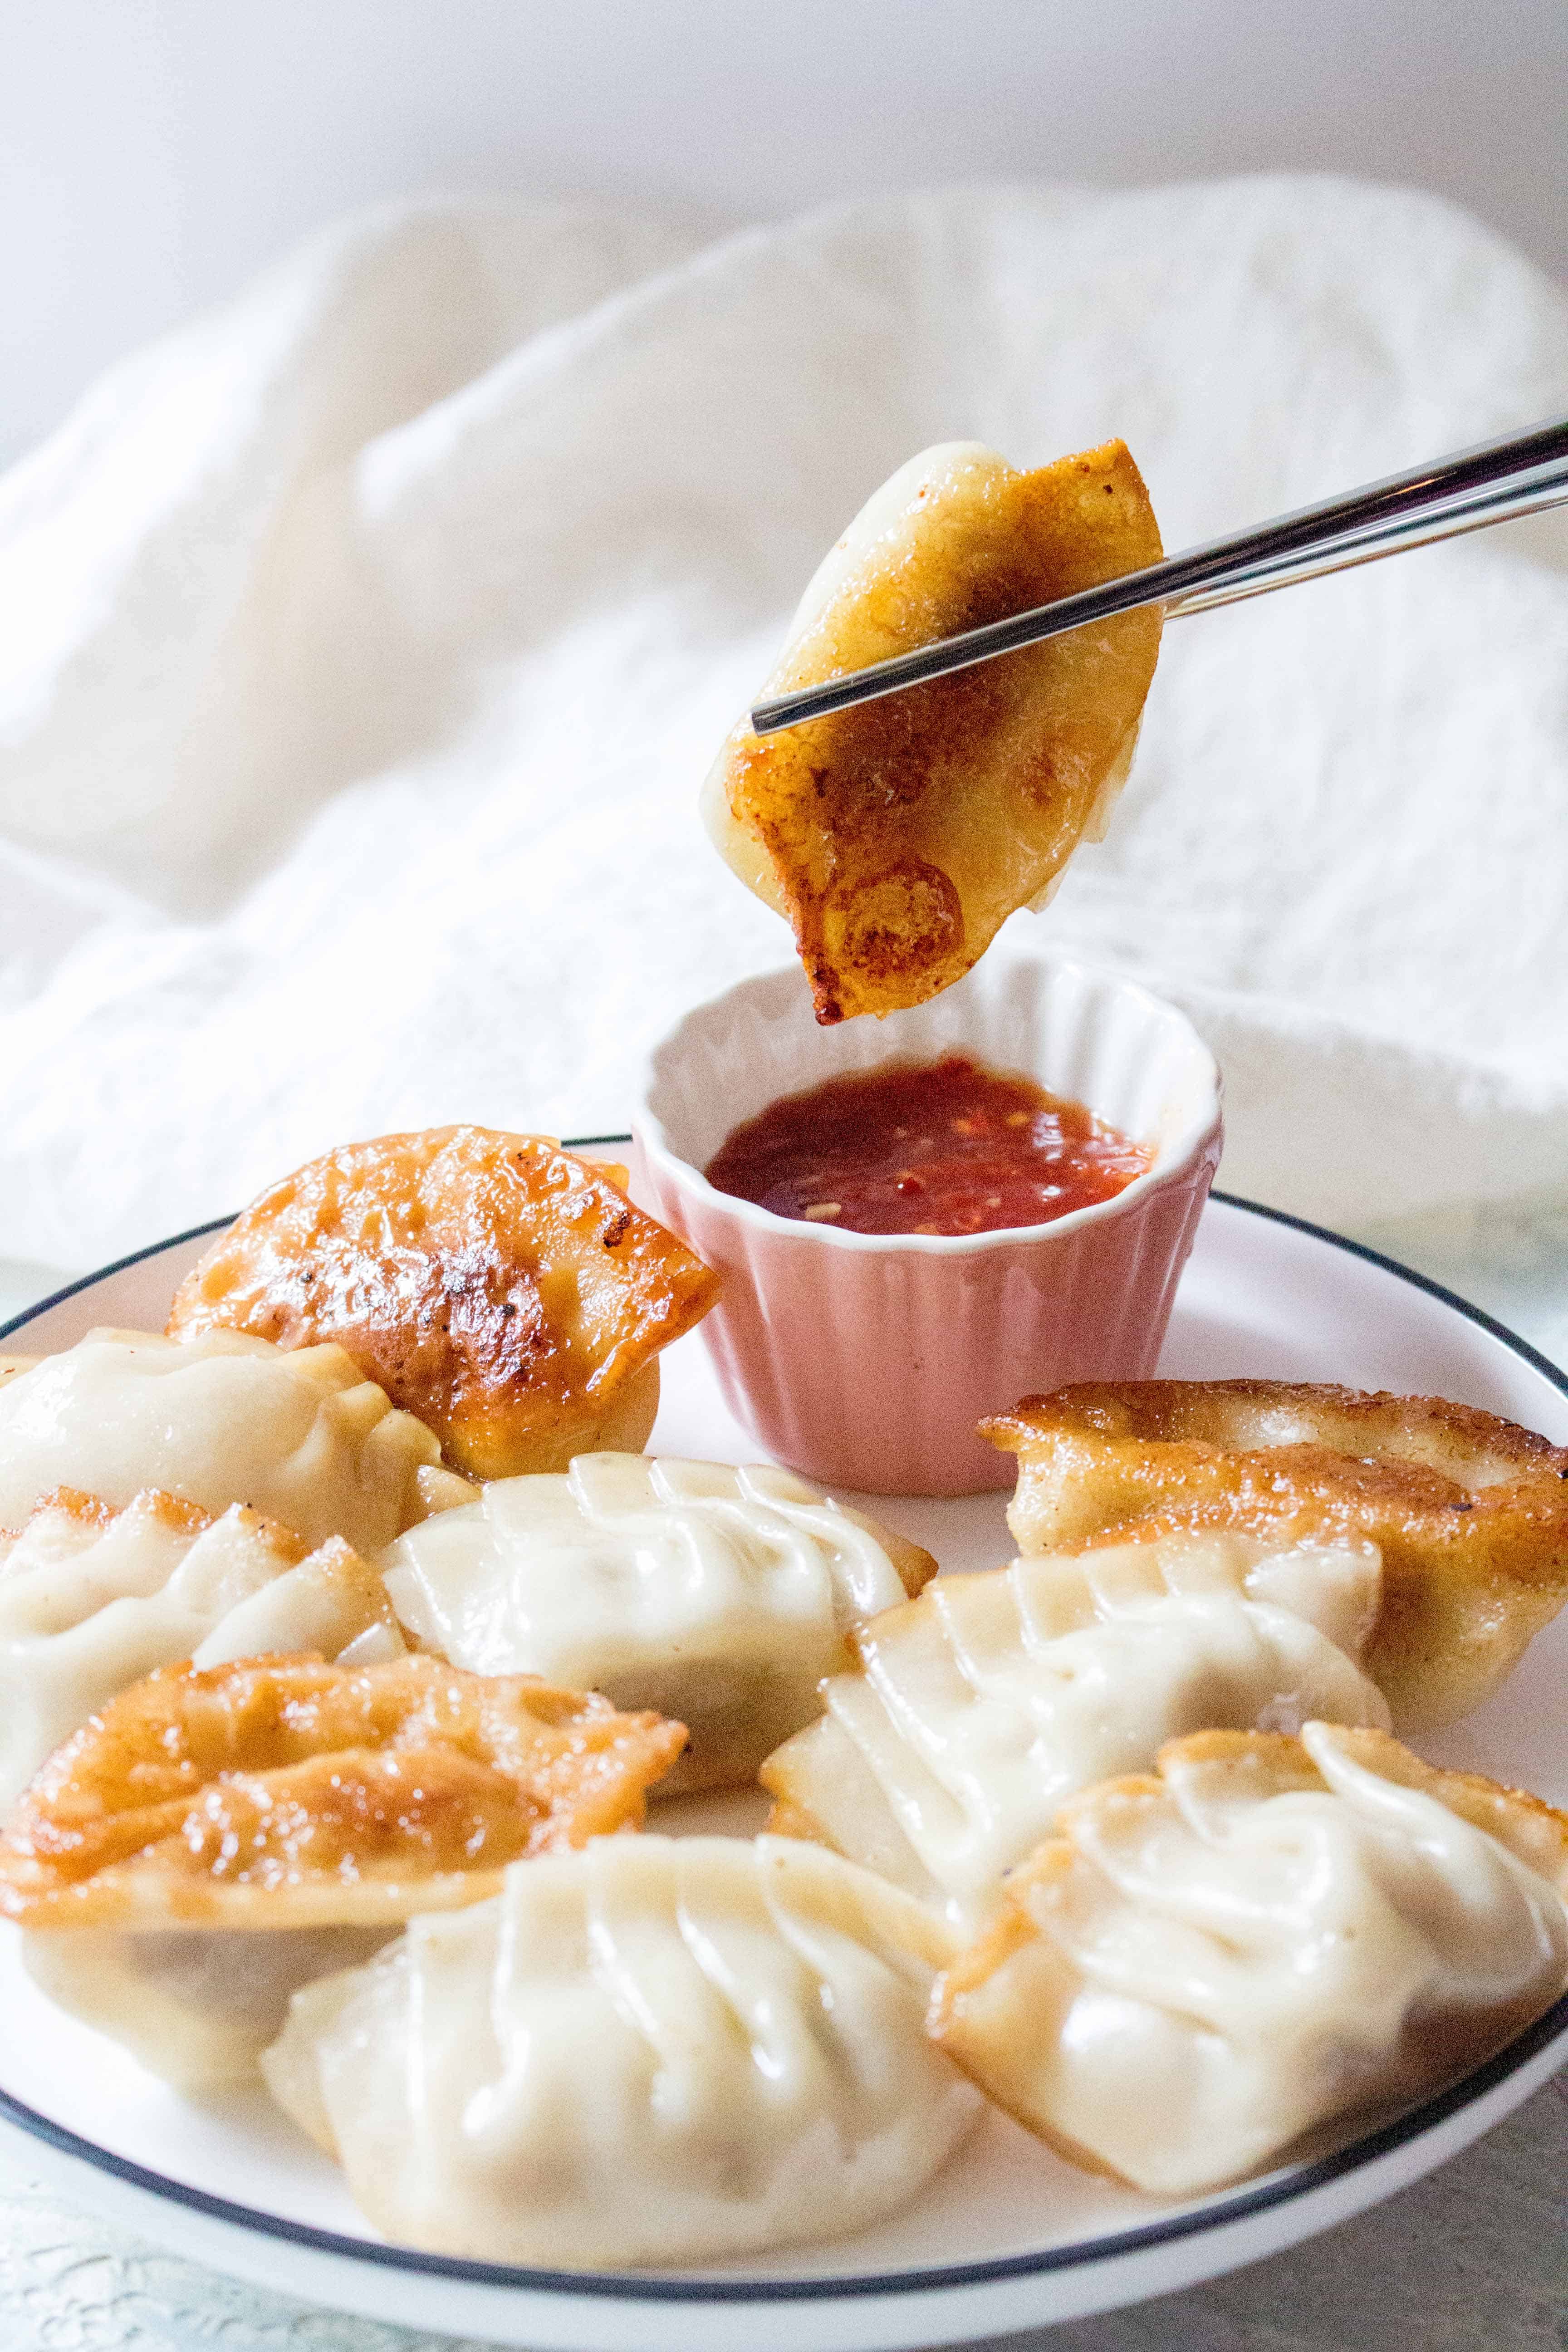 Filled with pork and garlic and have crispy golden bottoms, Pork Potstickers makes for the perfect meal or meal prep. These potstickers are freezer friendly so you can make always have some on hand!